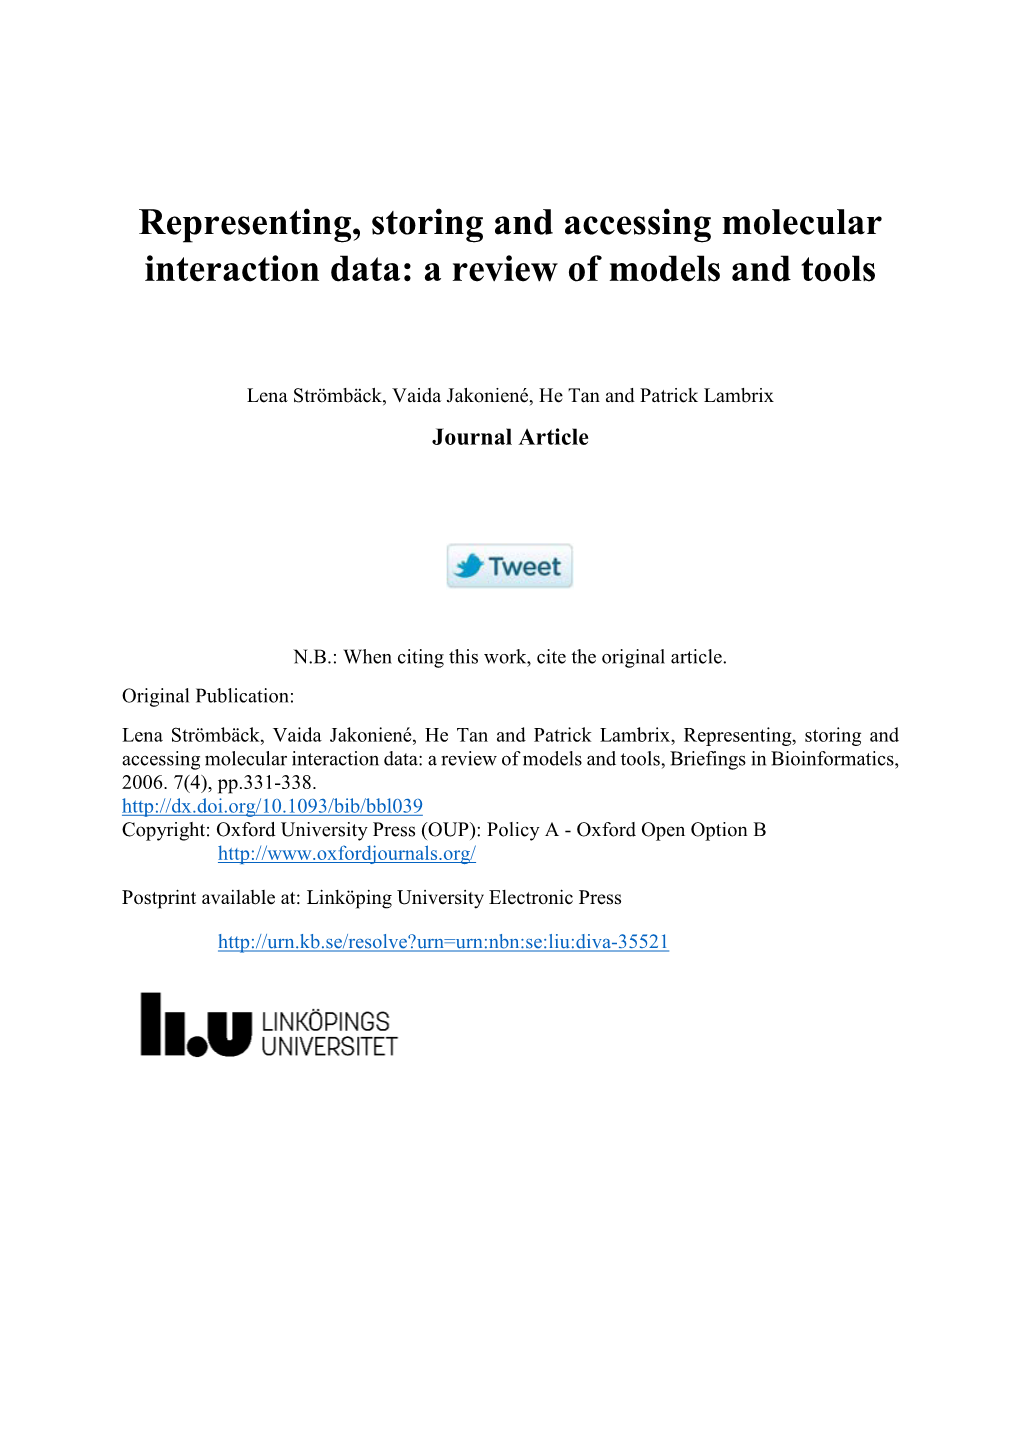 Representing, Storing and Accessing Molecular Interaction Data: a Review of Models and Tools